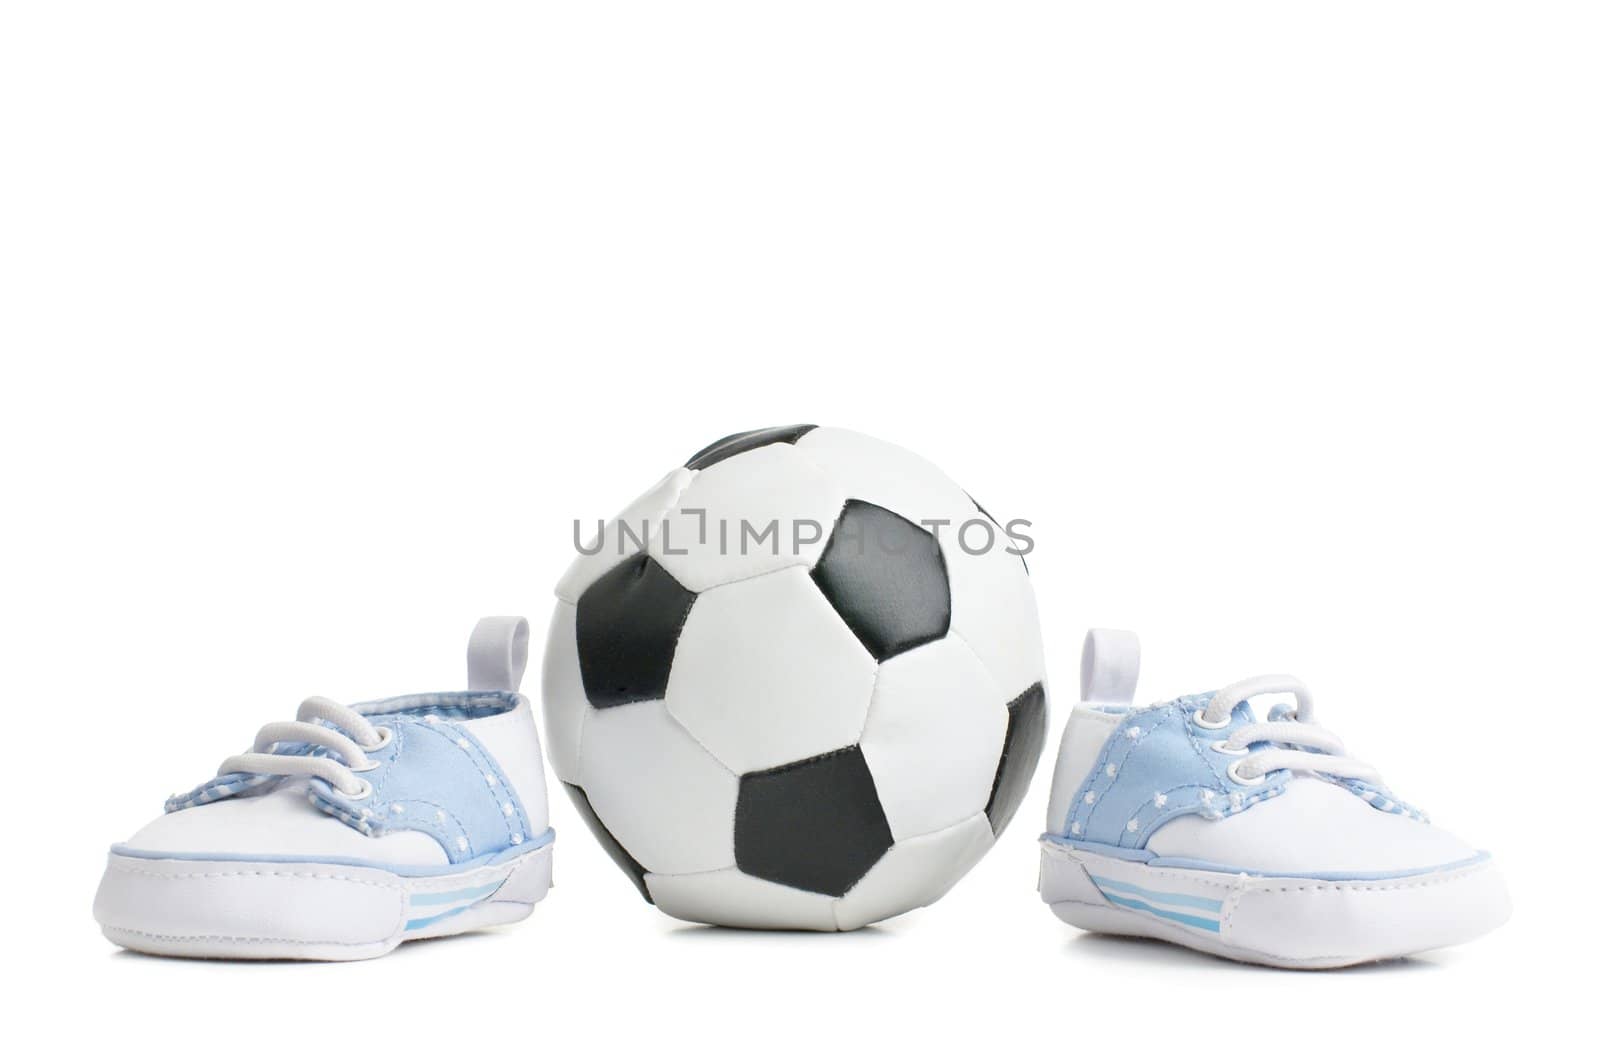 Football / Soccer Ball With Baby Shoes by cardmaverick